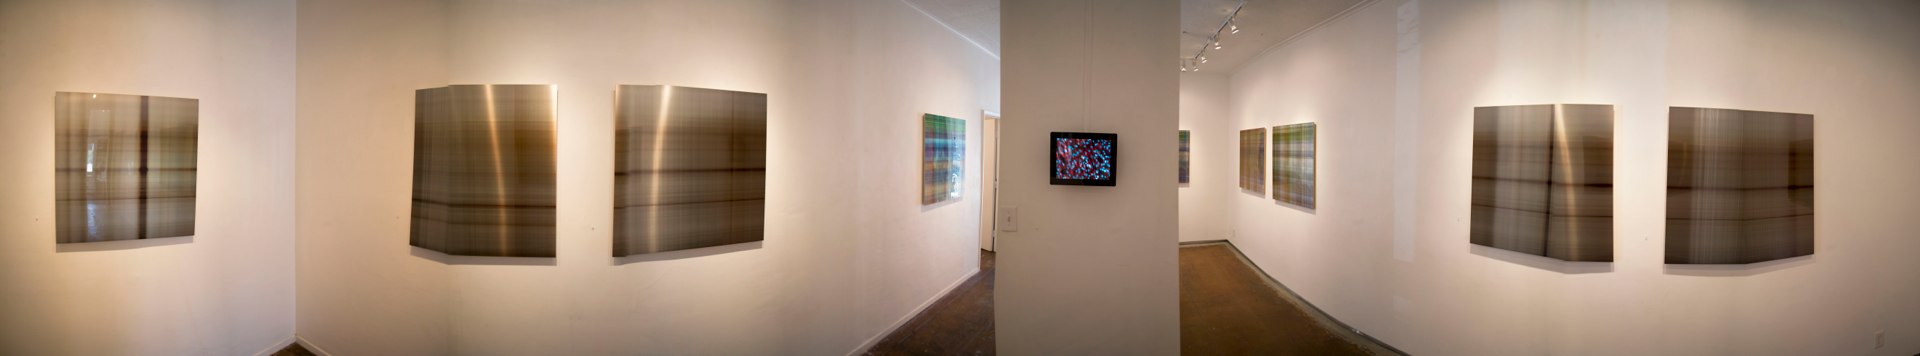 Penny Olson Installation View